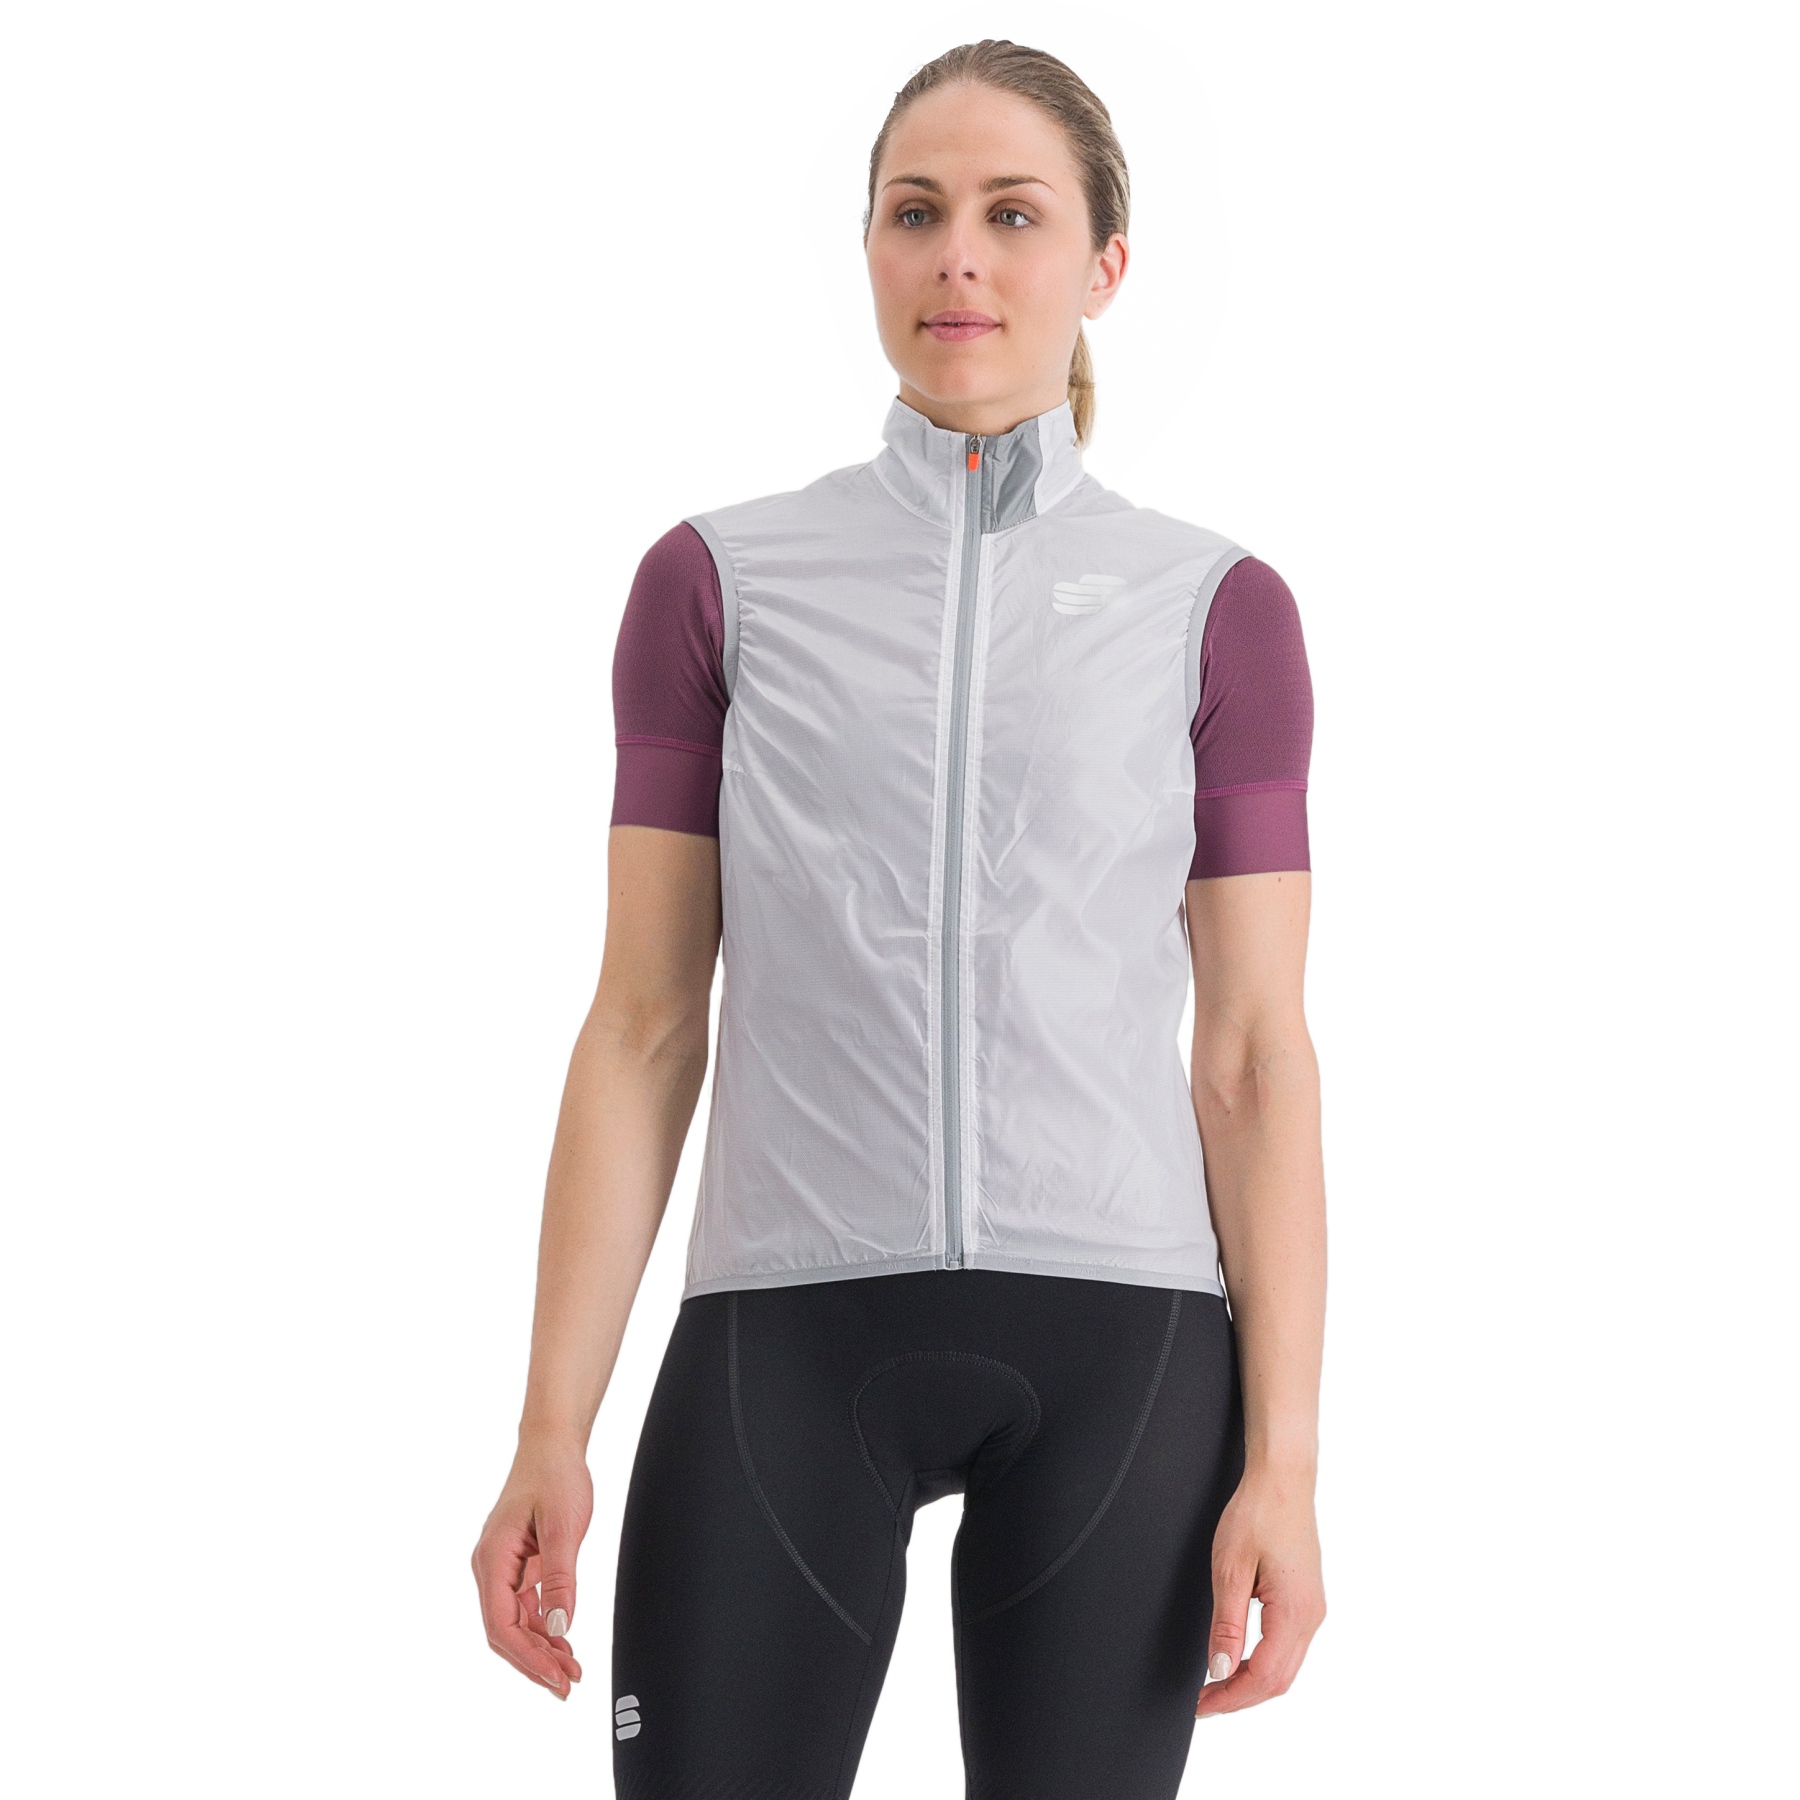 Picture of Sportful Hot Pack Easylight Women Vest - 101 White